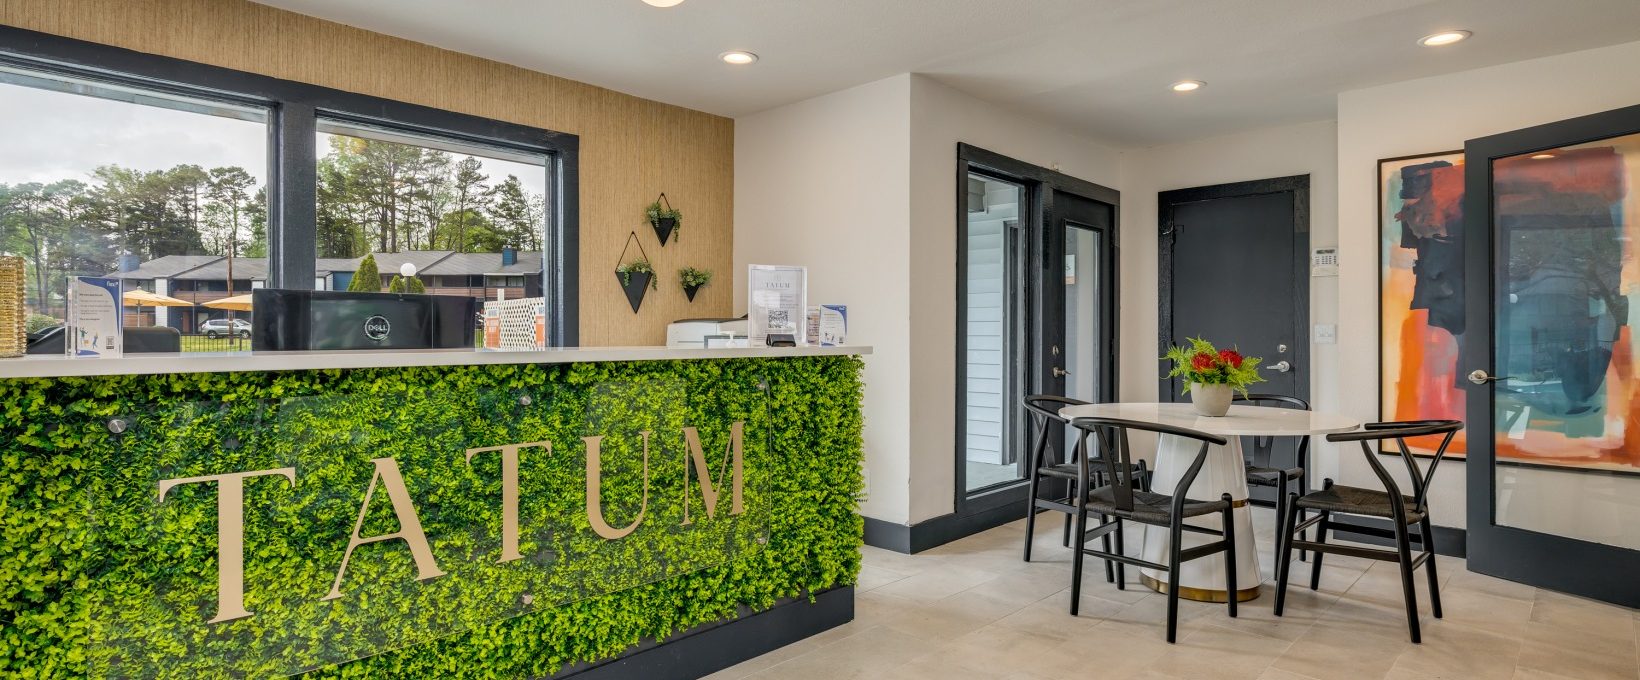 the reception area of a hotel with plants on the wall at The  Tatum